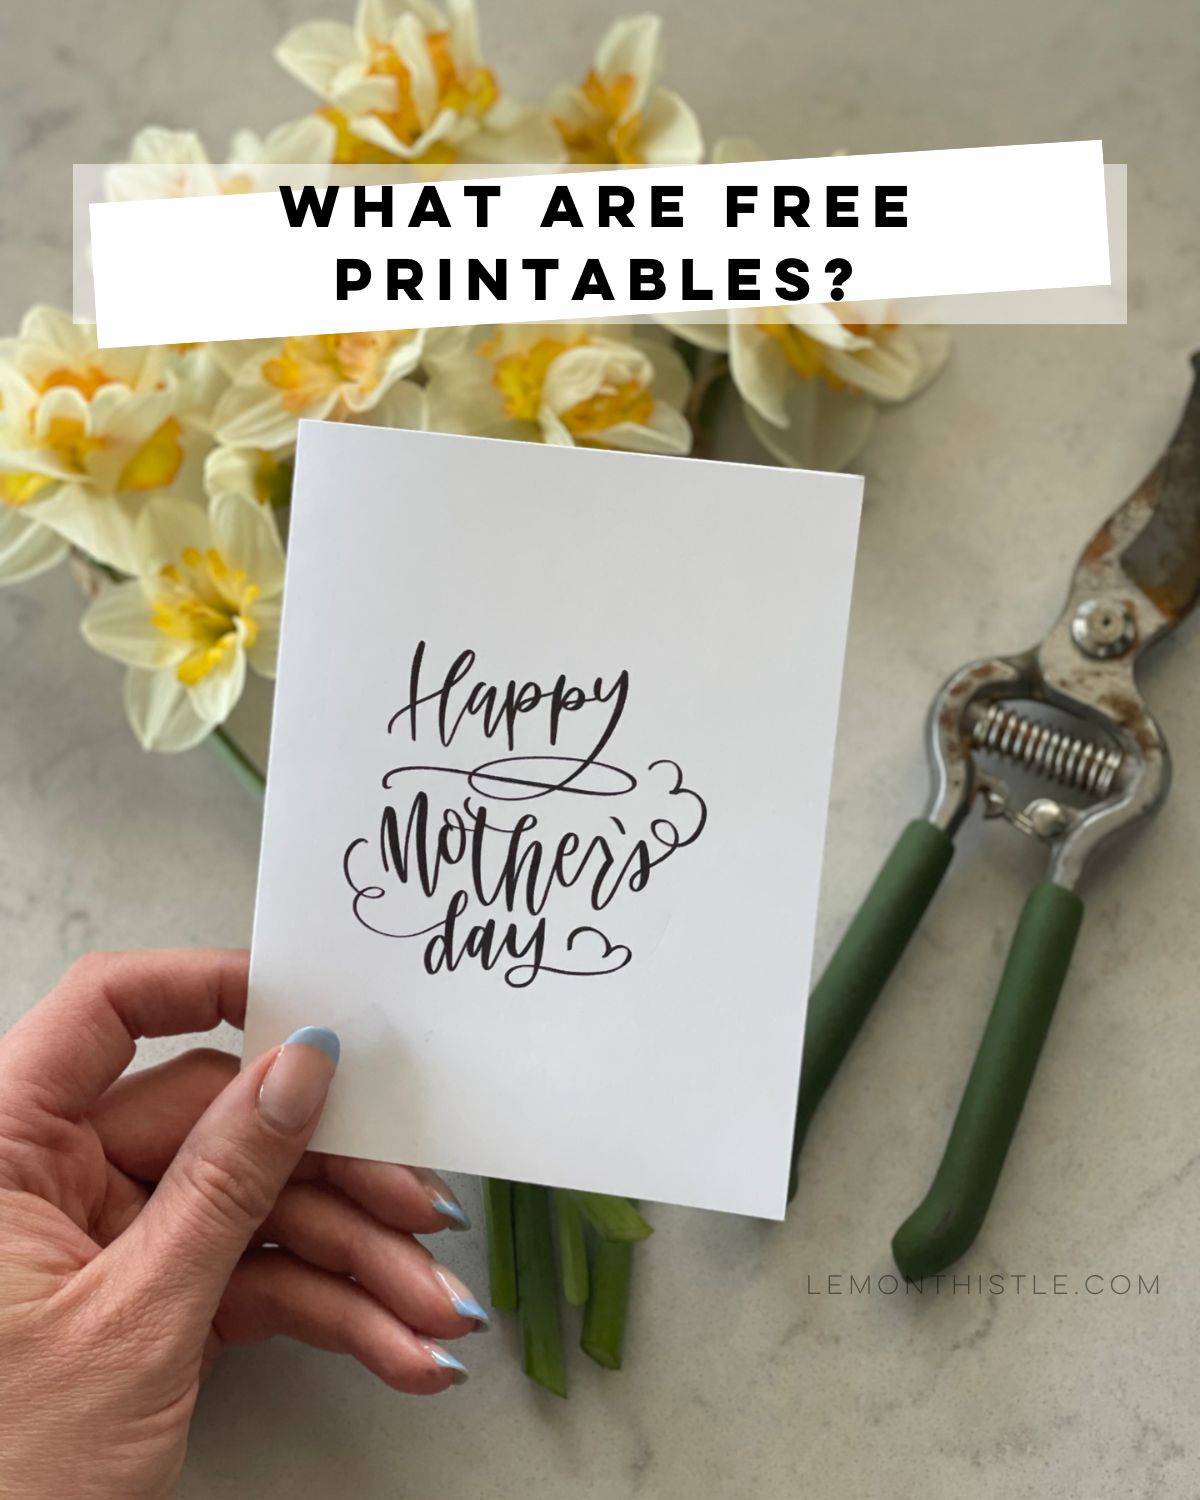 What are free printables text over image of printable mothers day card